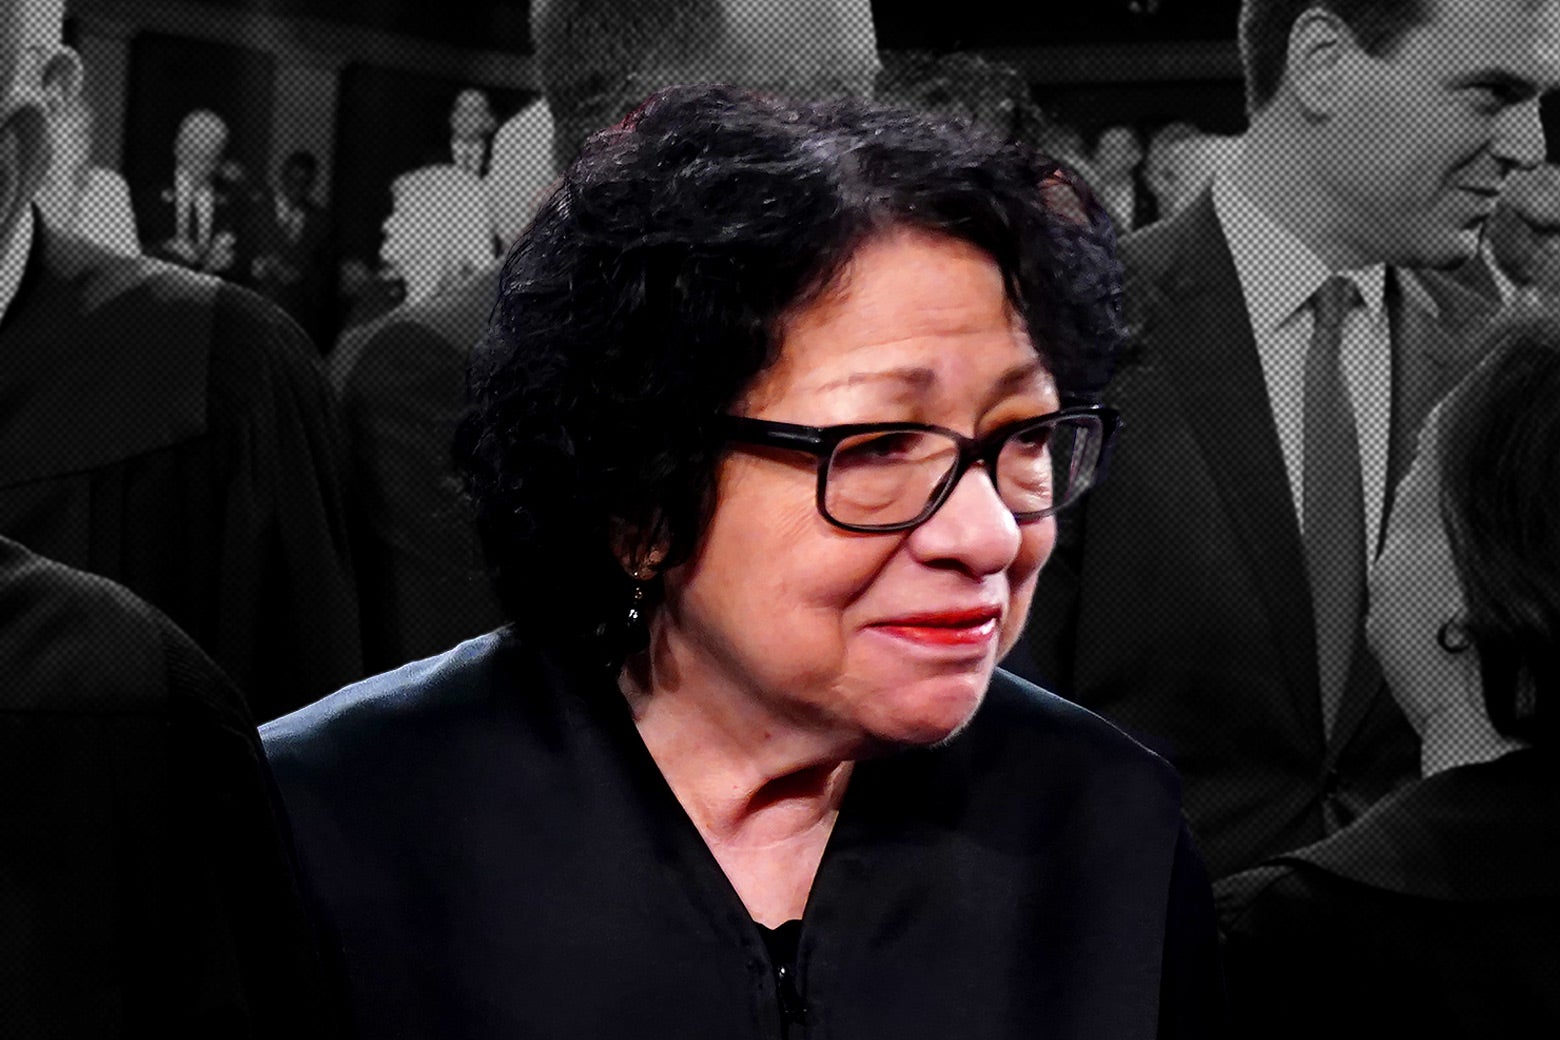 Should Sonia Sotomayor Retire? Is It Sexist to Ask Her To? Dahlia Lithwick and Mark Joseph Stern